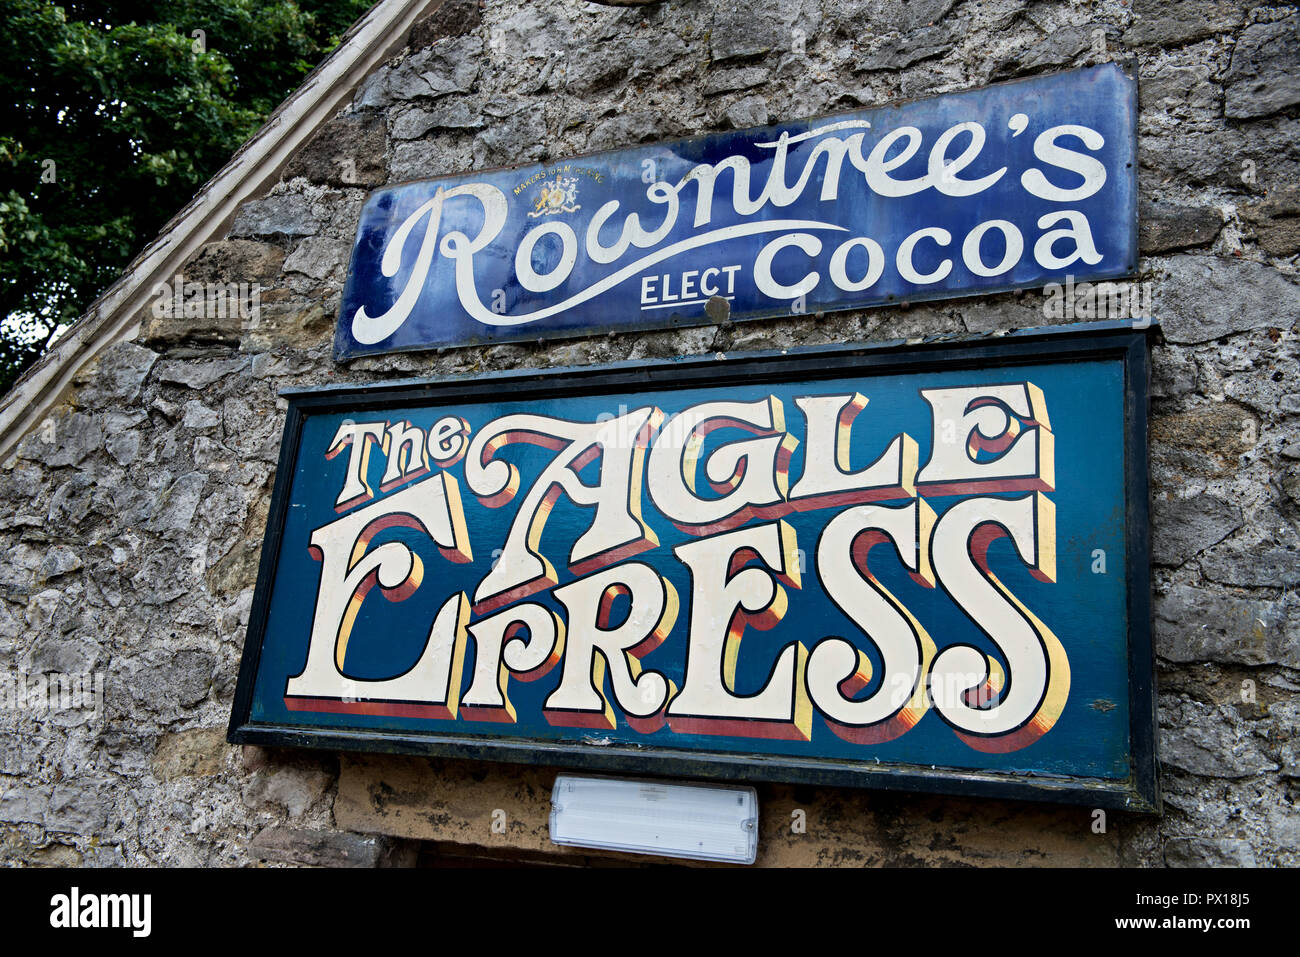 Antique Rowntrees cocoa and Eagle Printing Press metal sign on a building wall at Crich Tramway Museum in the village of Crich, Derbyshire, UK Stock Photo